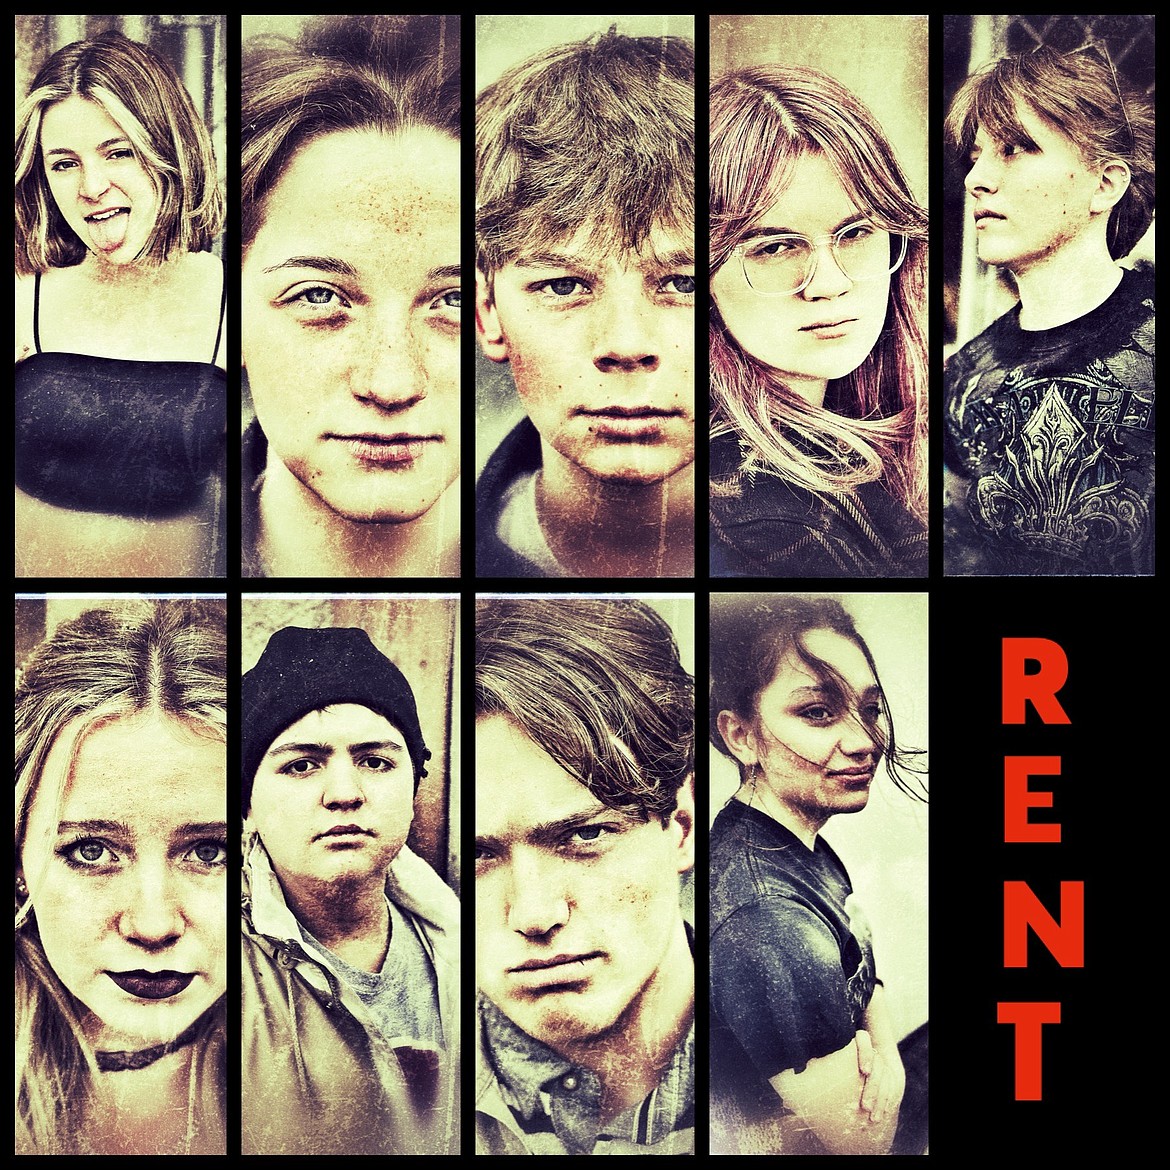 Alpine Theatre Project’s production of “RENT” runs April 29 through May 1.